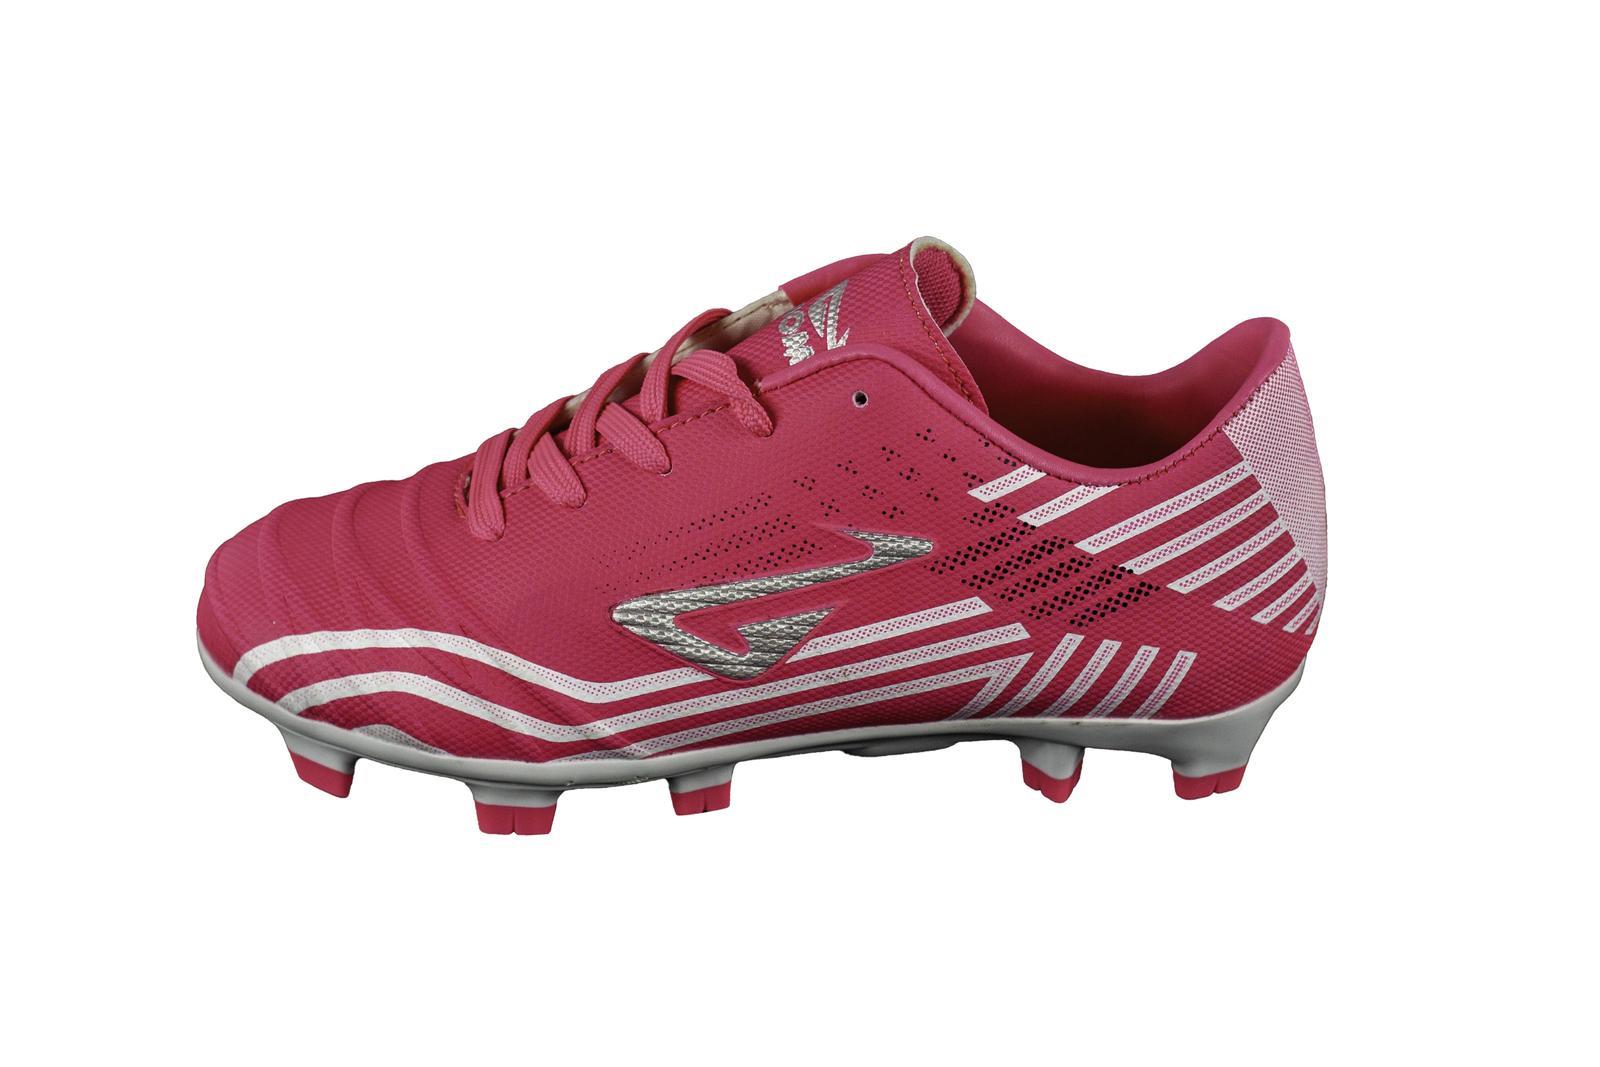 Nomis Prodigy Junior FG Boots - Pink / White / Silver - US Kid's Size 12C